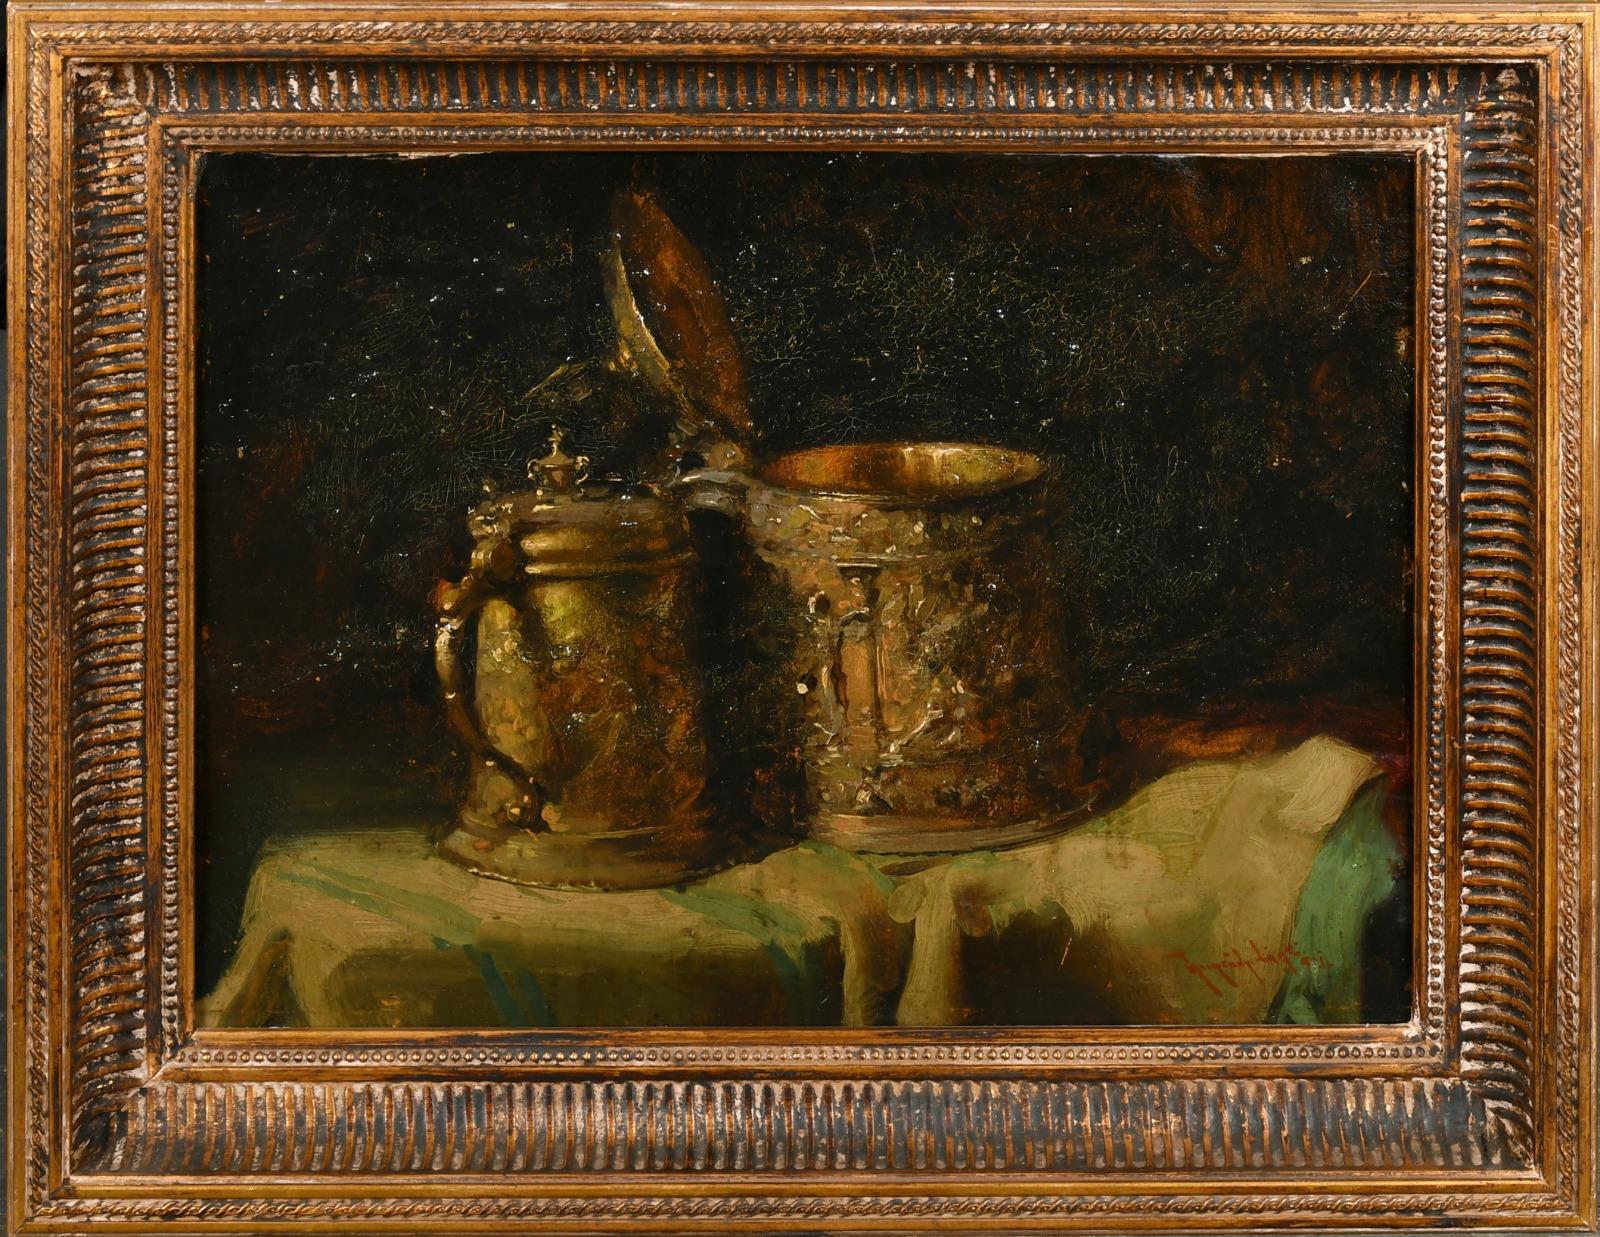 Still Life Of Tankards
Early 20th Century European School
signed oil painting on board, framed
framed: 16 x 21 inches
board: 12 x 16.5 inches
provenance: private collection, England 
condition: very good and sound condition 
